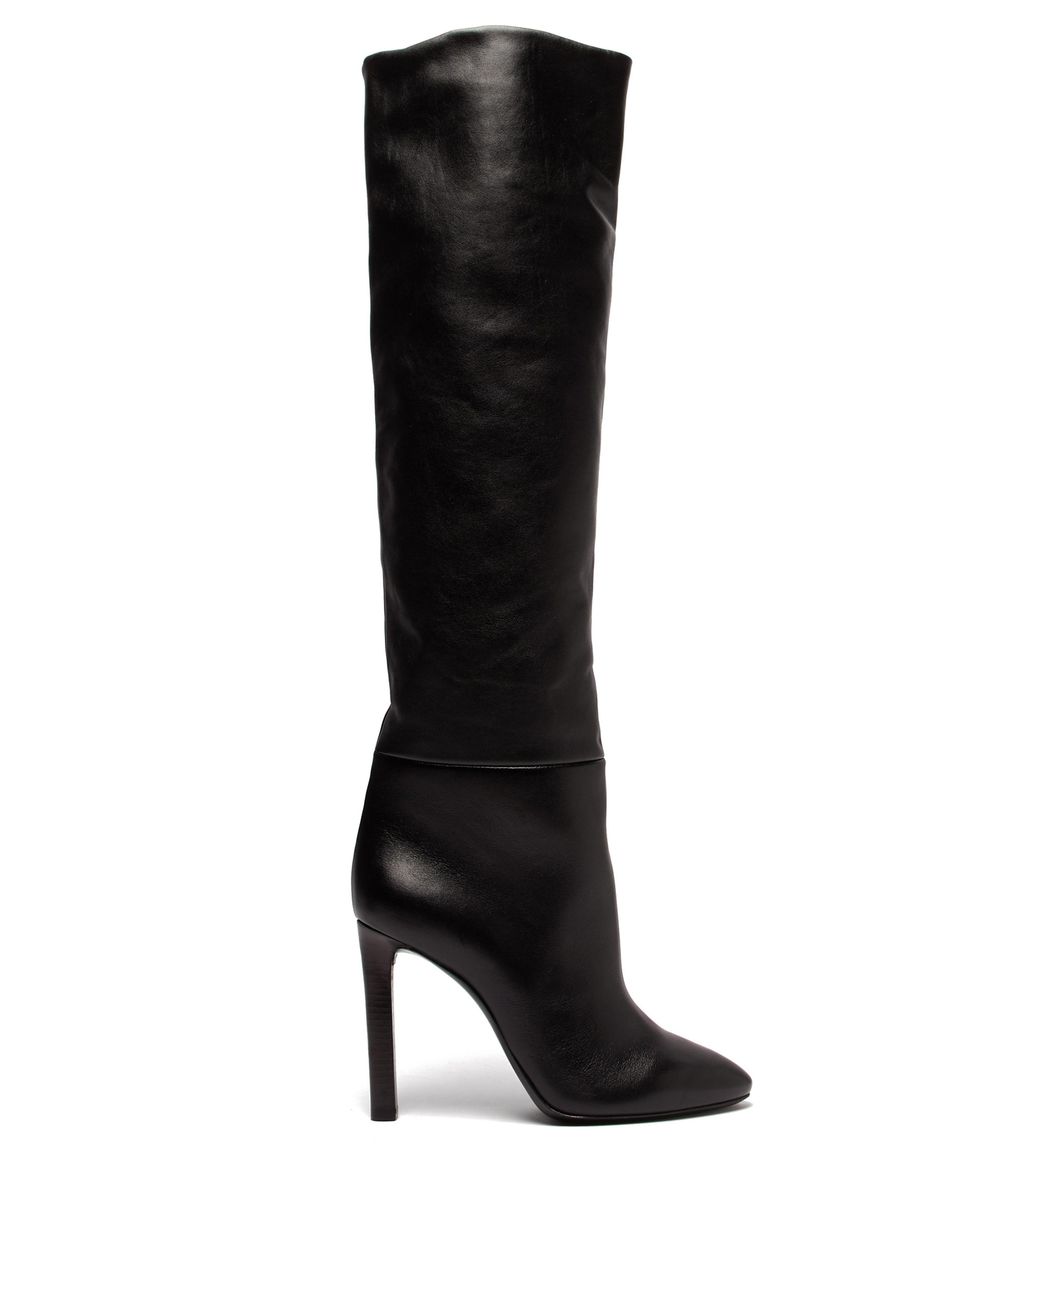 Saint Laurent Kate Knee High Leather Boots in Black | Lyst UK